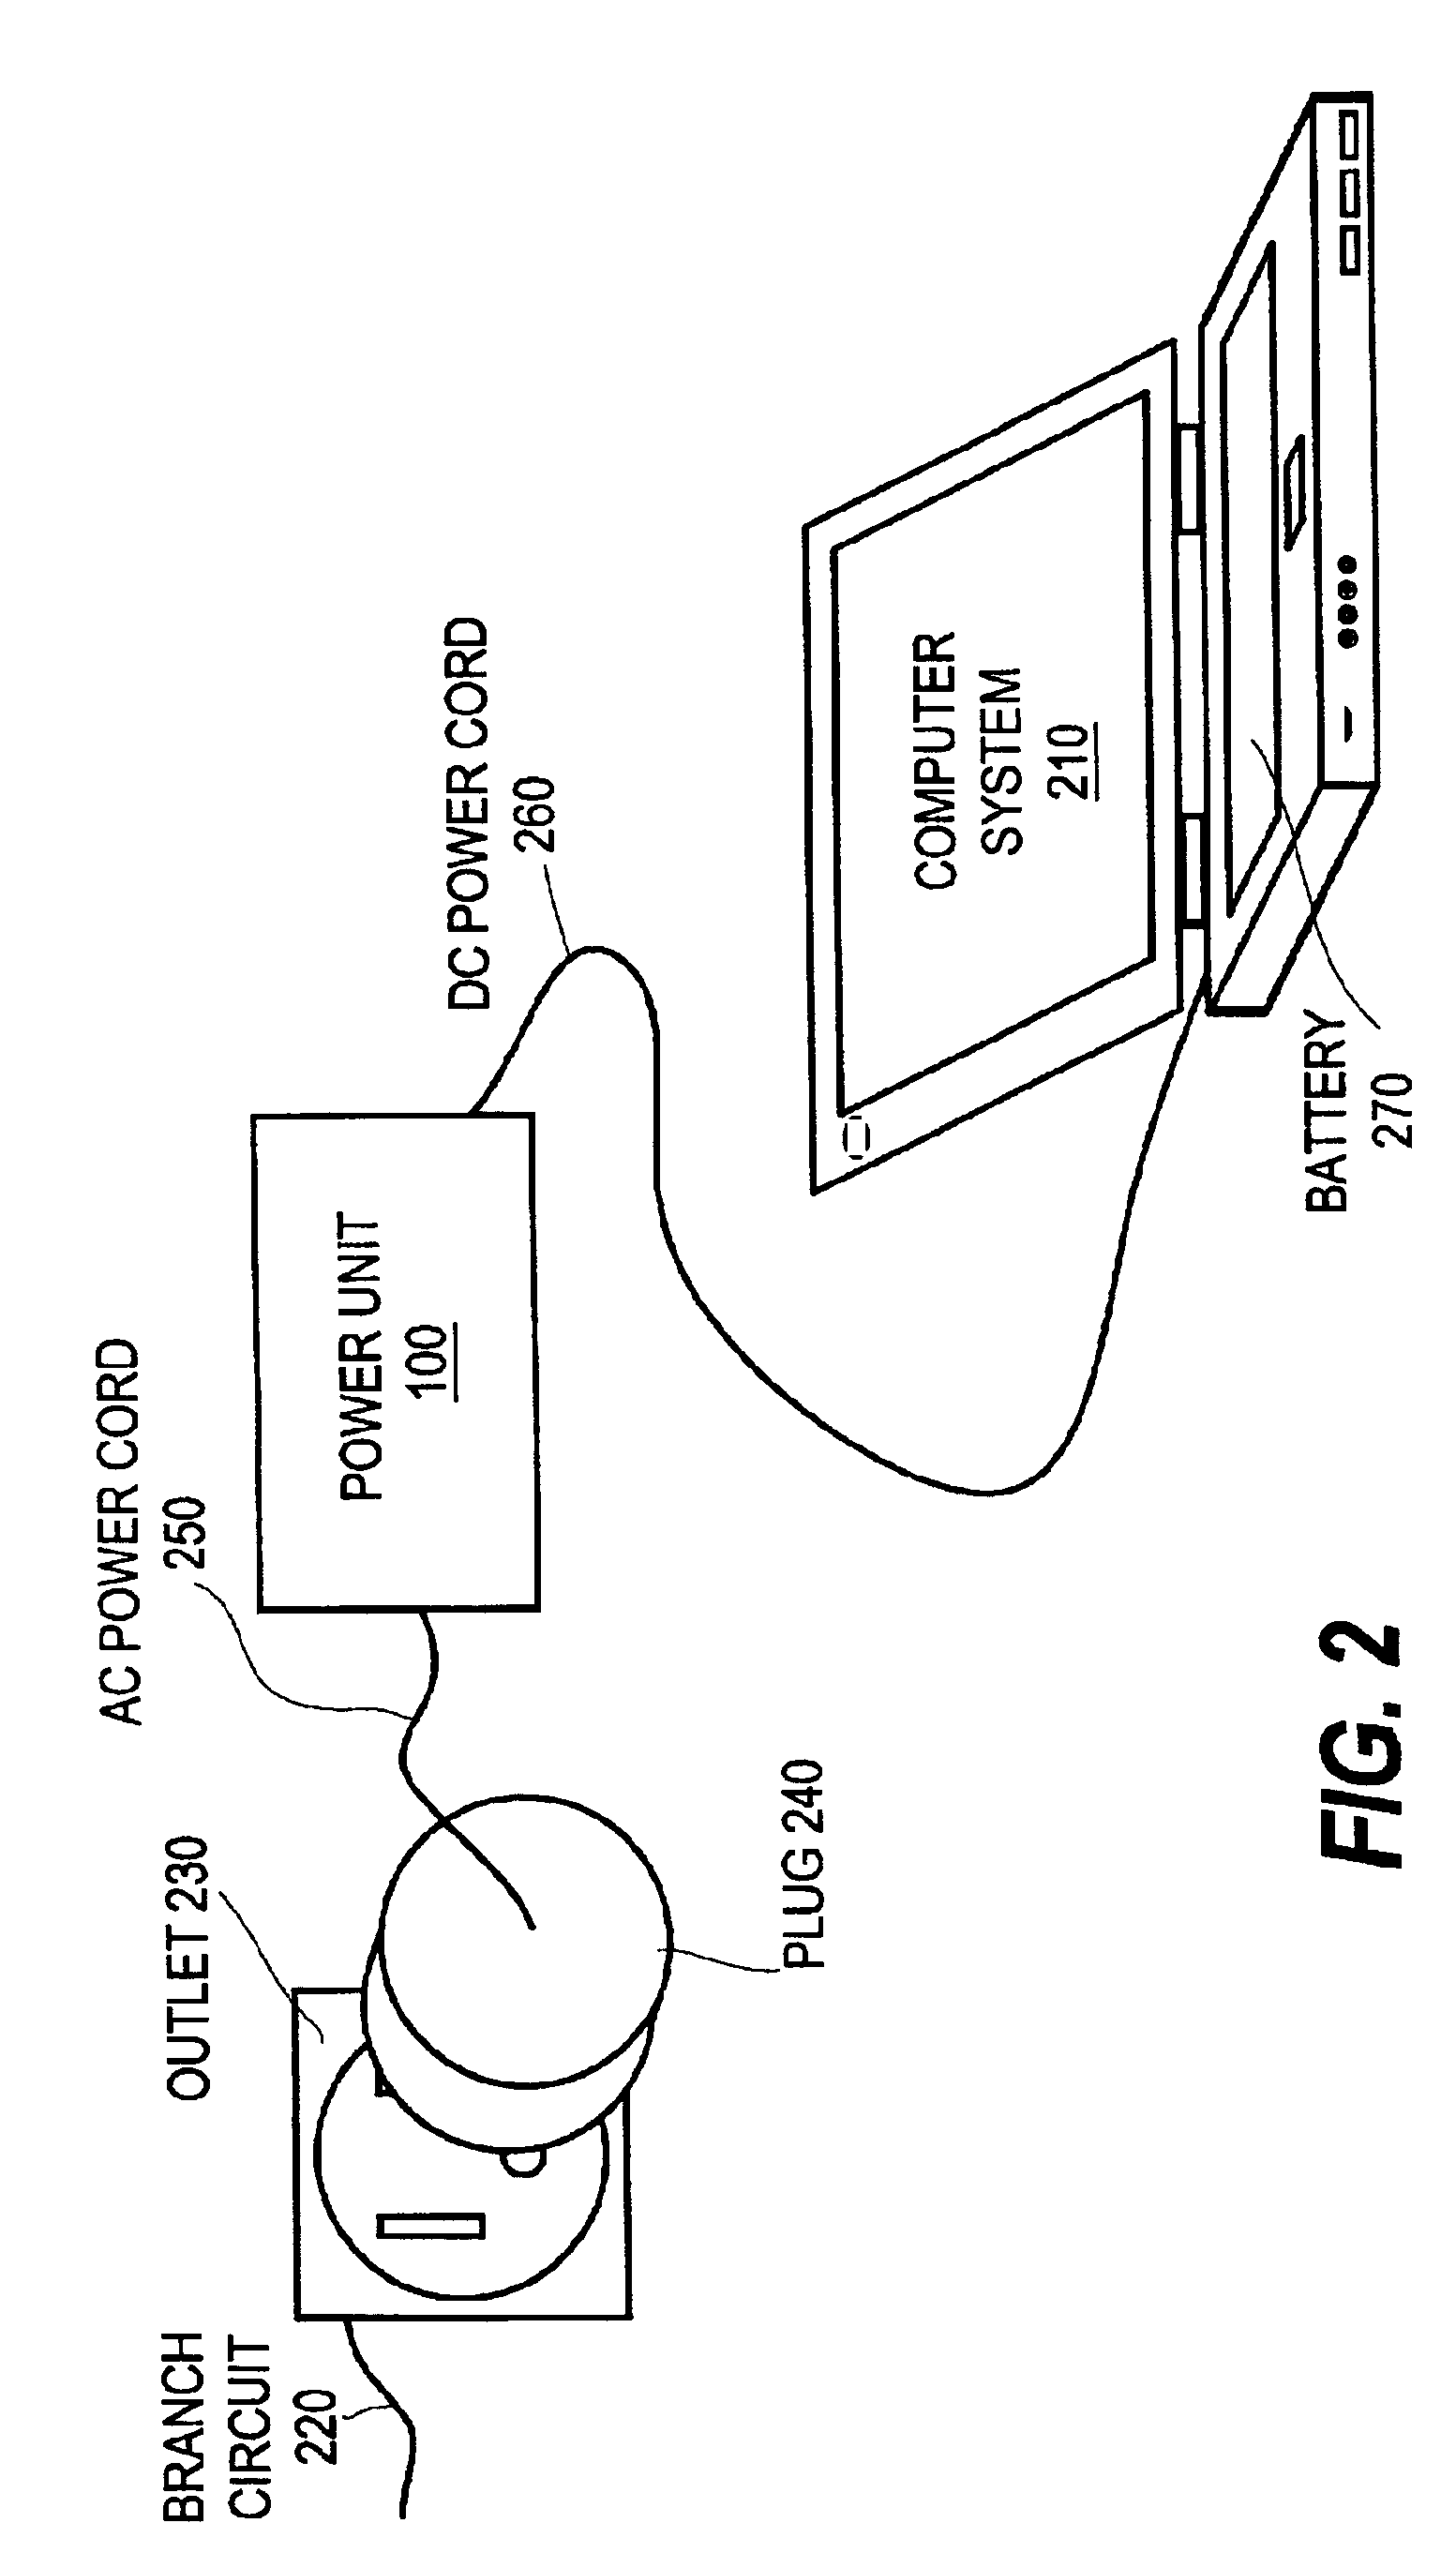 Method and apparatus for reducing power consumption for power supplied by a voltage adapter